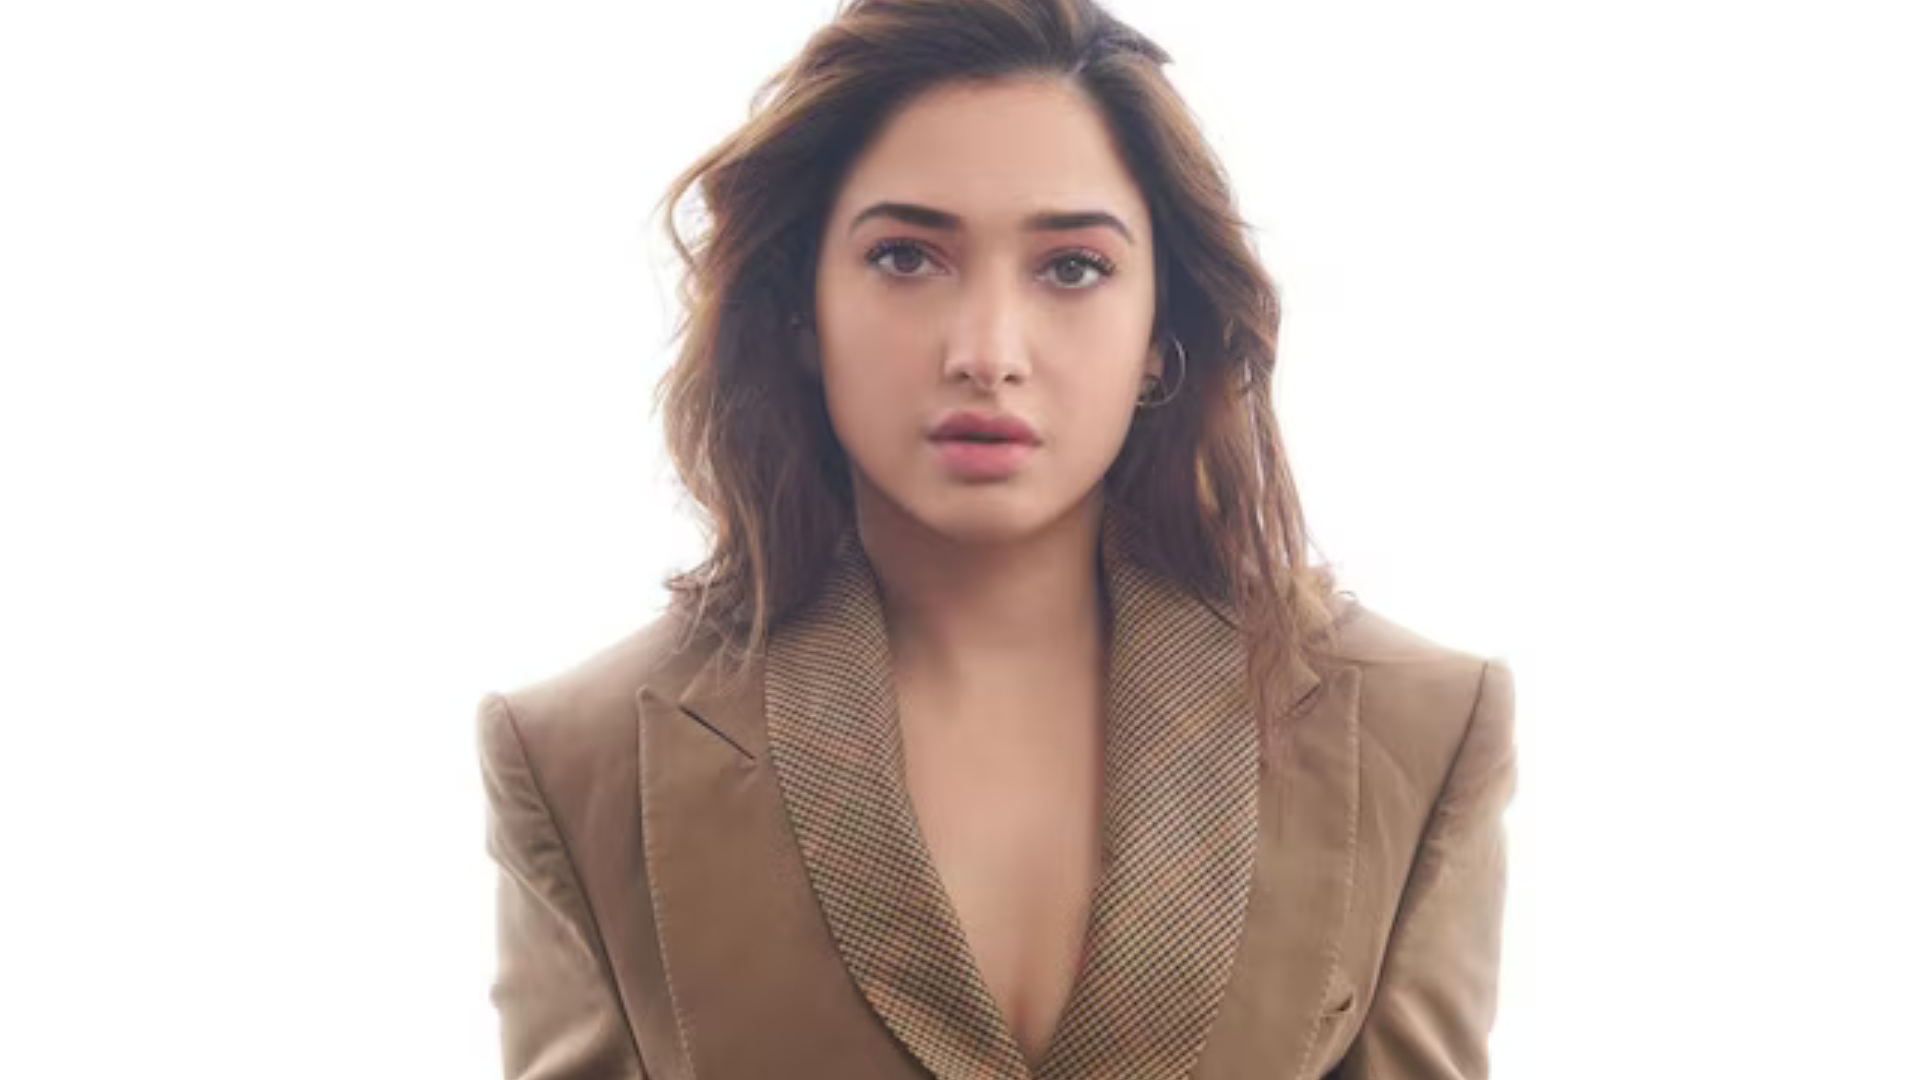 Mahadev Betting App Case: Tamannaah Bhatia Requests Extension for ED Summons